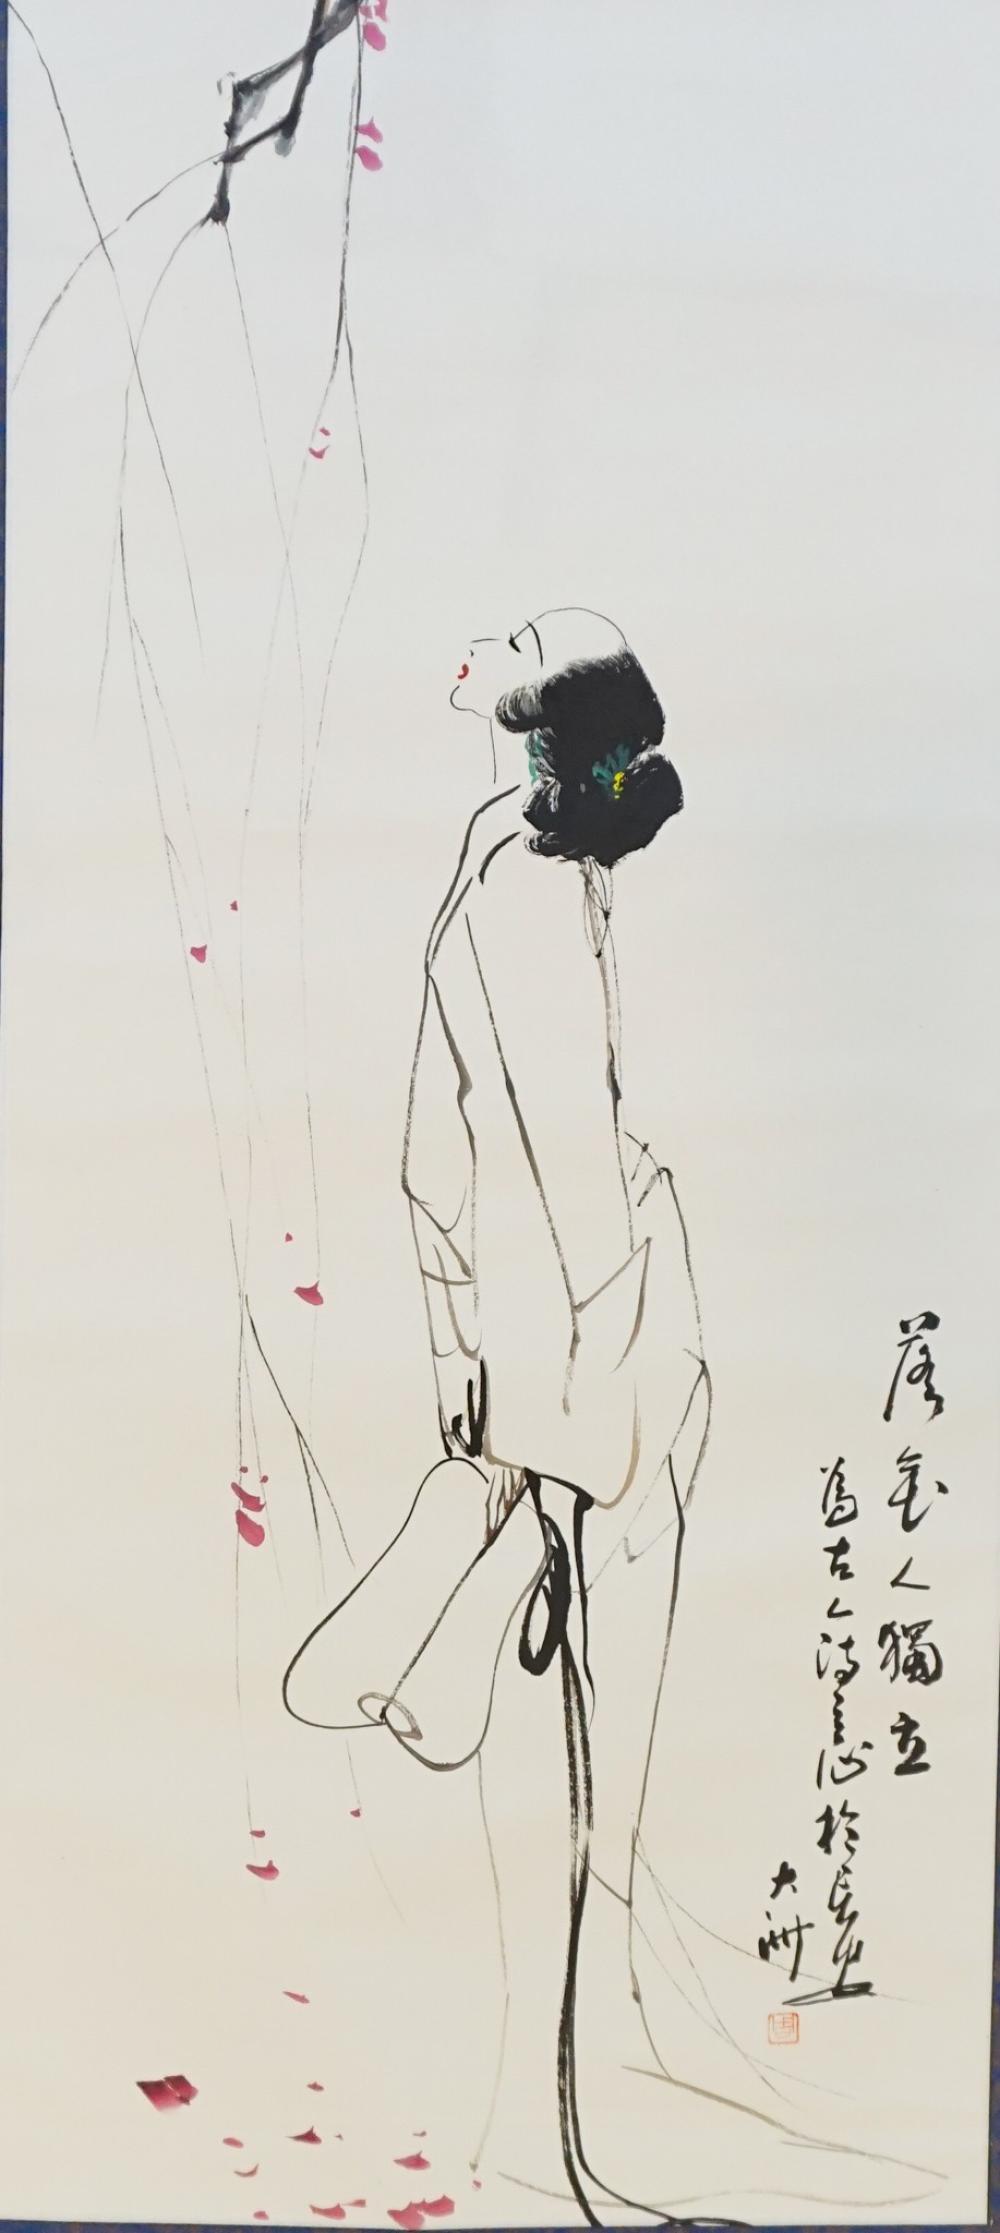 JAPANESE INK AND WATERCOLOR HANGING 32b5a3